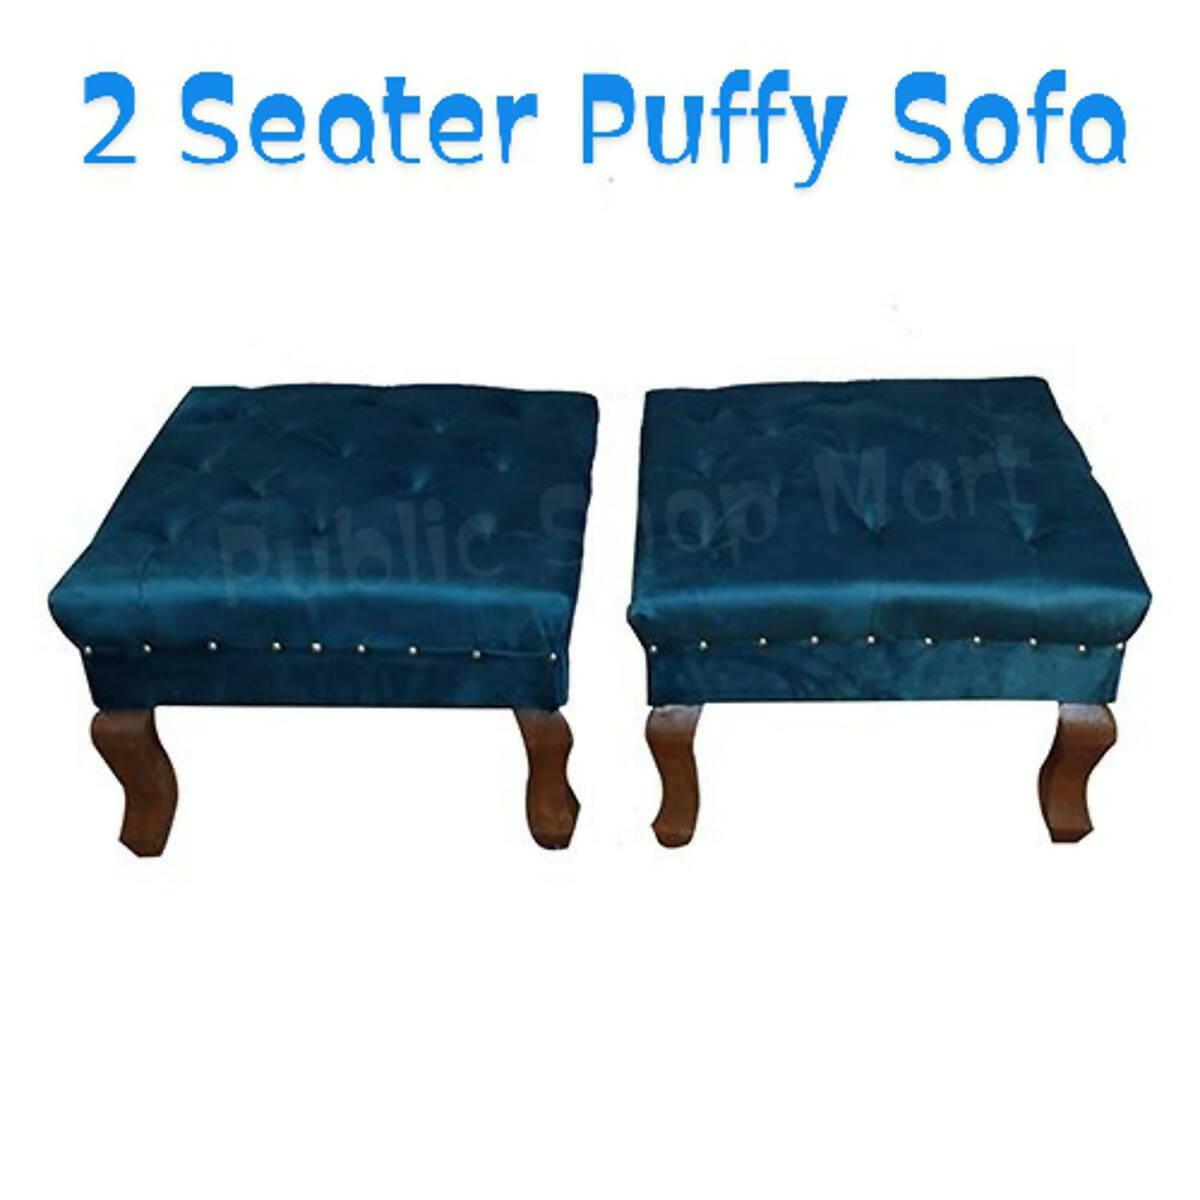 Sofa 2 Seater Tufted Stools New Stylish Modern Design Colour Can be Customised